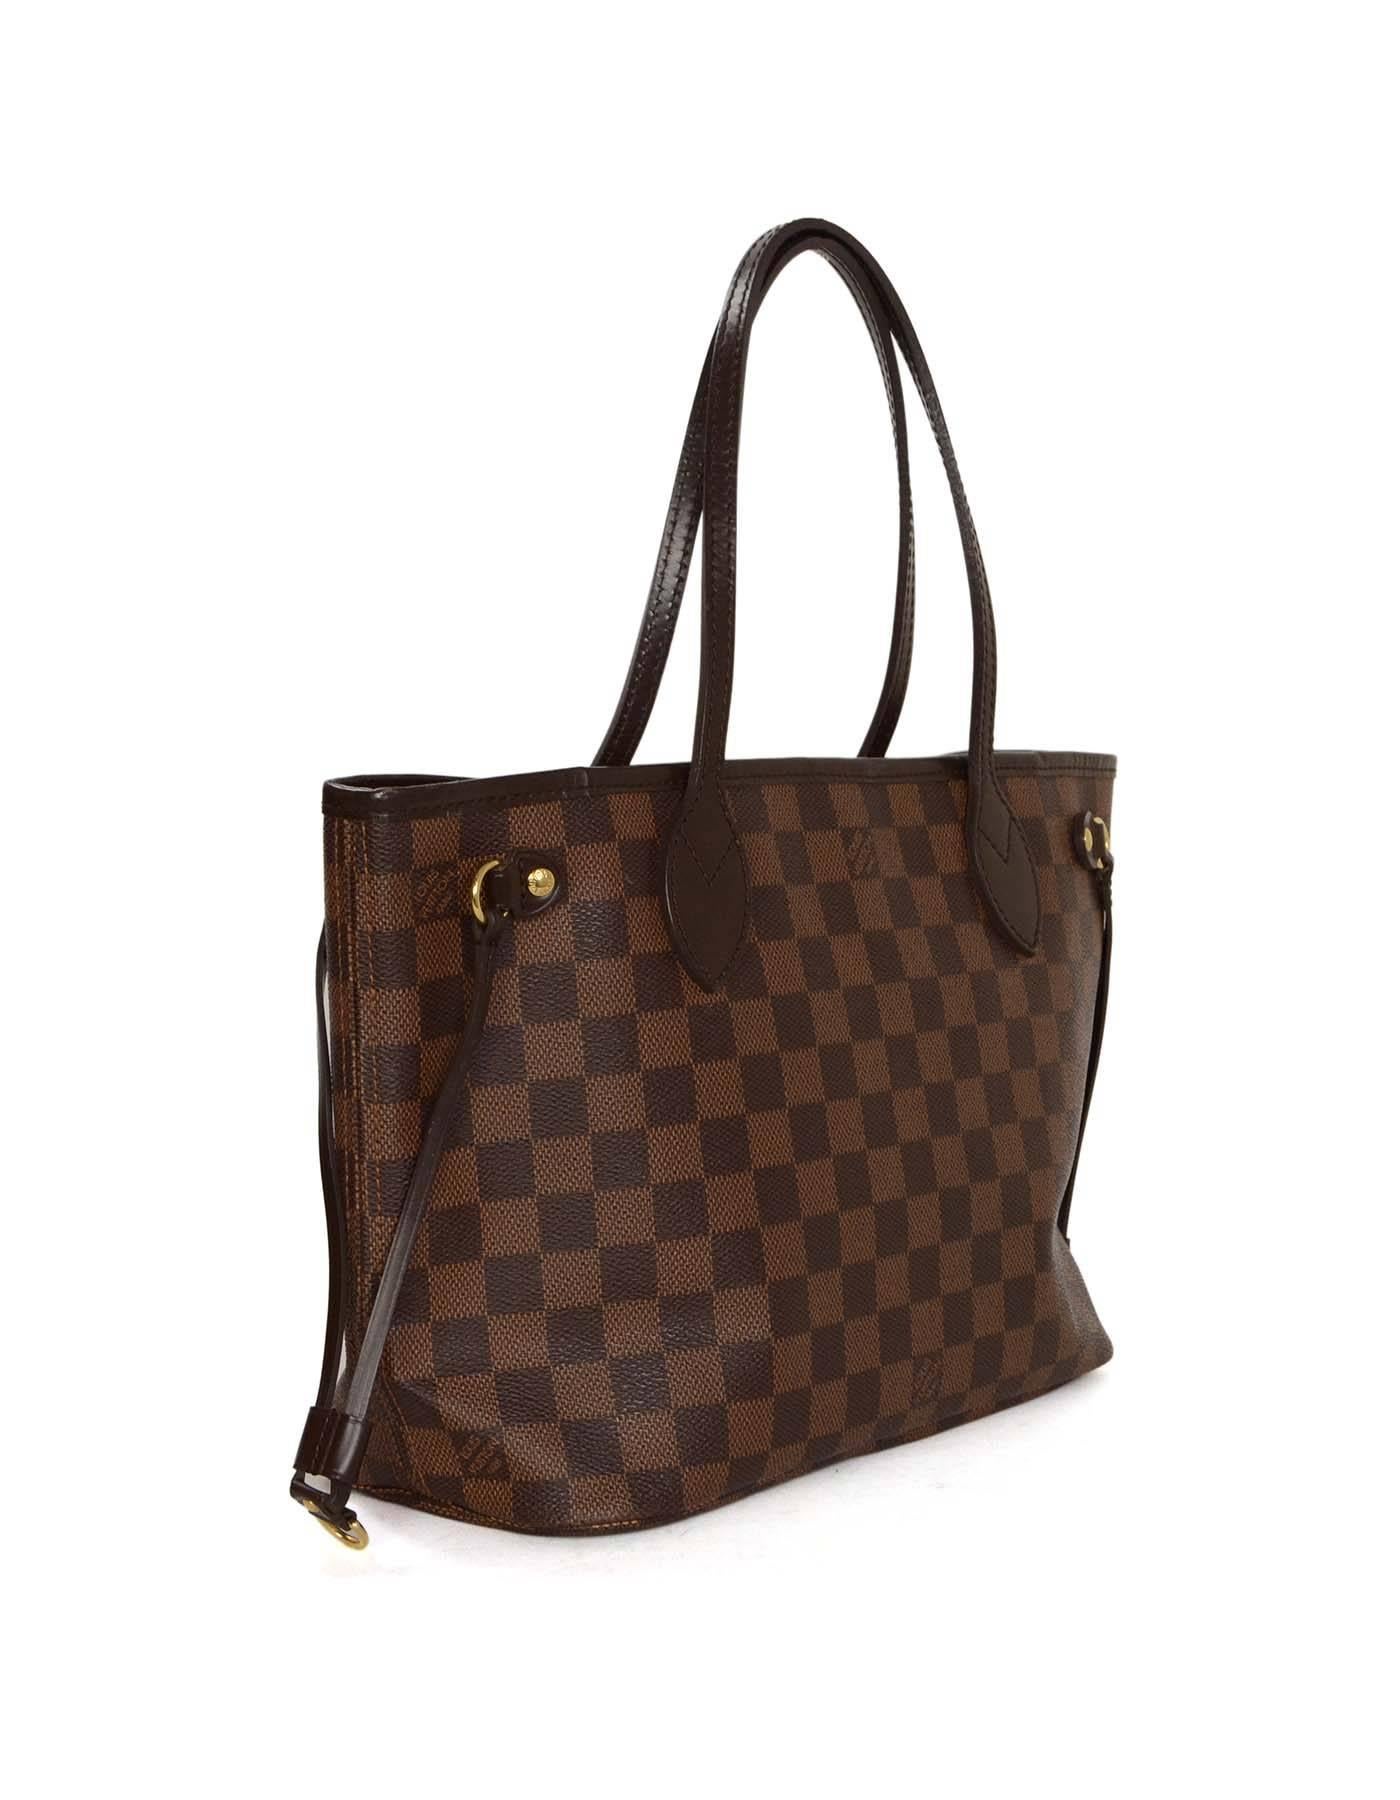 Louis Vuitton Damier Coated Canvas Neverfull PM Tote Bag

-Made In: France
-Year of Production: 2011
-Color: Brown
-Hardware: Goldtone
-Materials: Coated canvas with leather trim
-Closure/Opening: Open with hook closure
-Exterior Pockets: